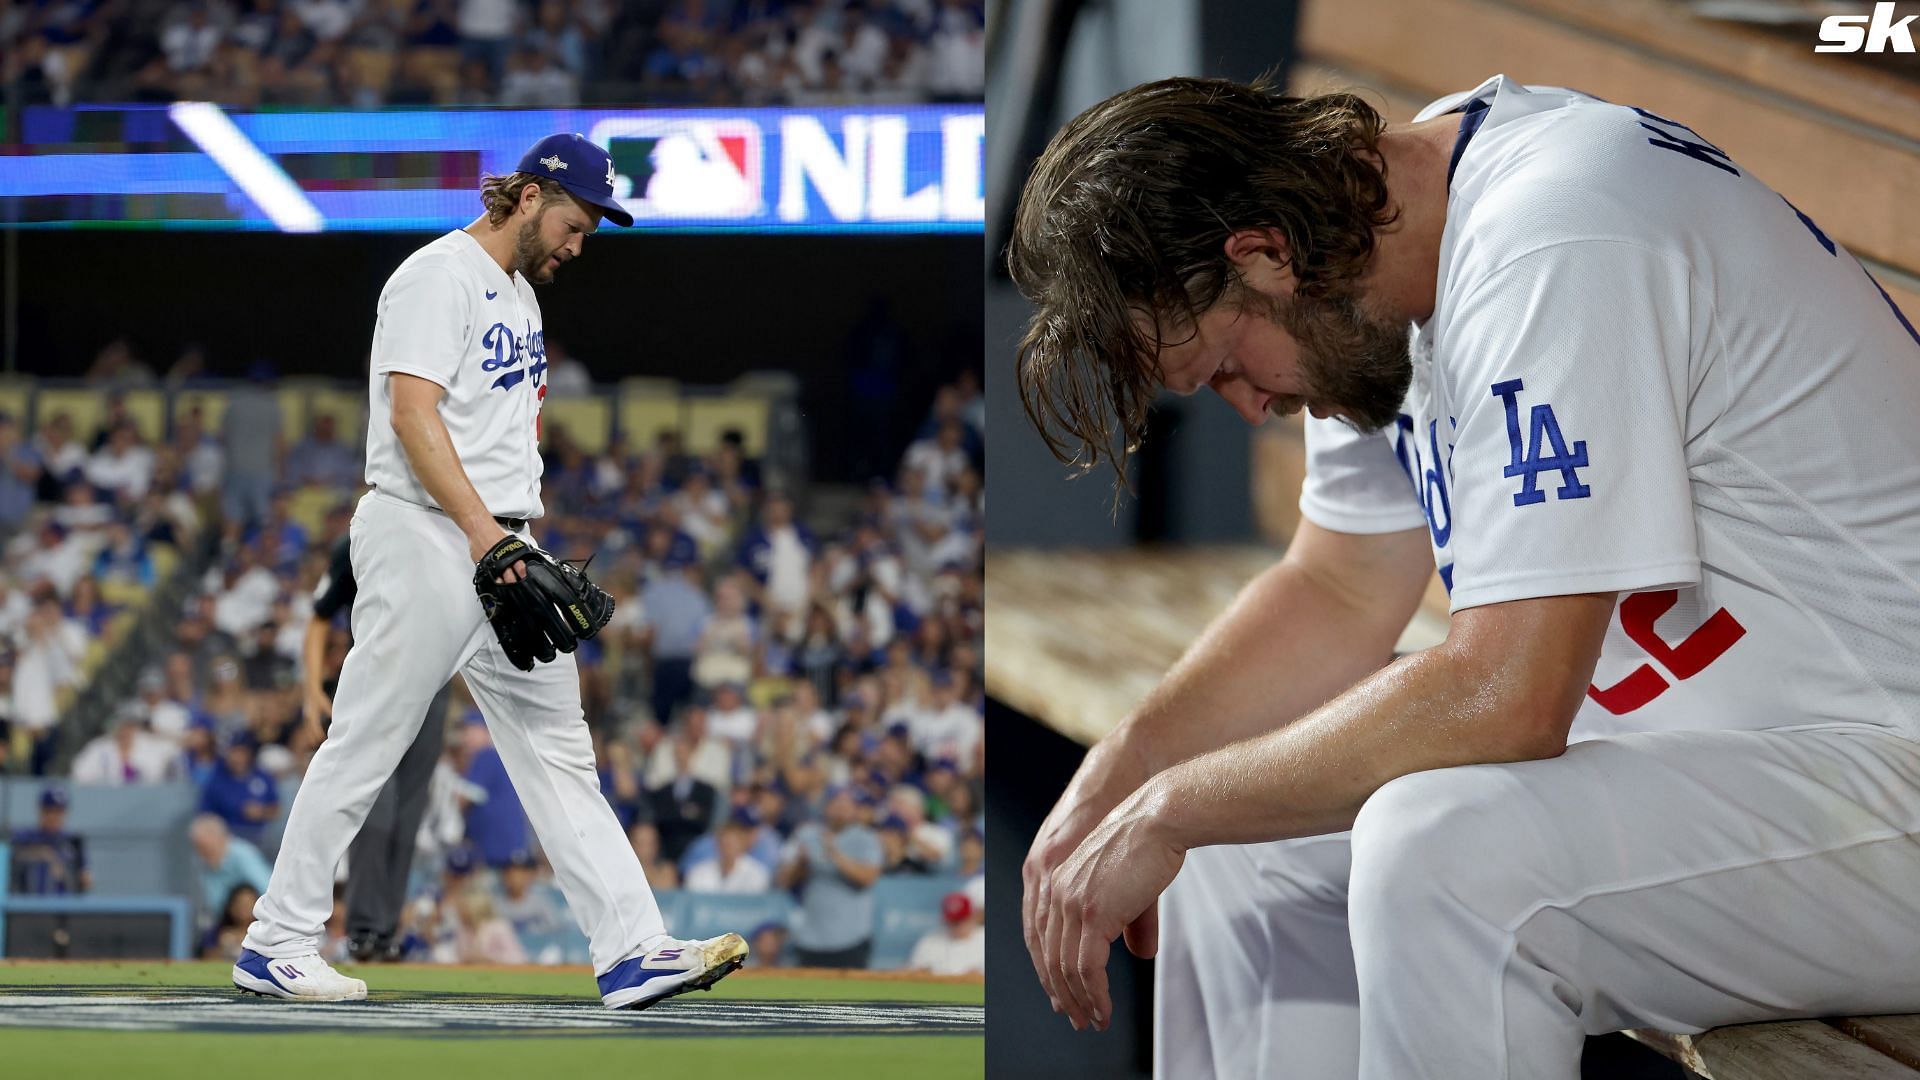 Clayton Kershaw of the Los Angeles Dodgers sits in the dugout after being relieved in the first inning against the Arizona Diamondbacks during Game One of the NLDS